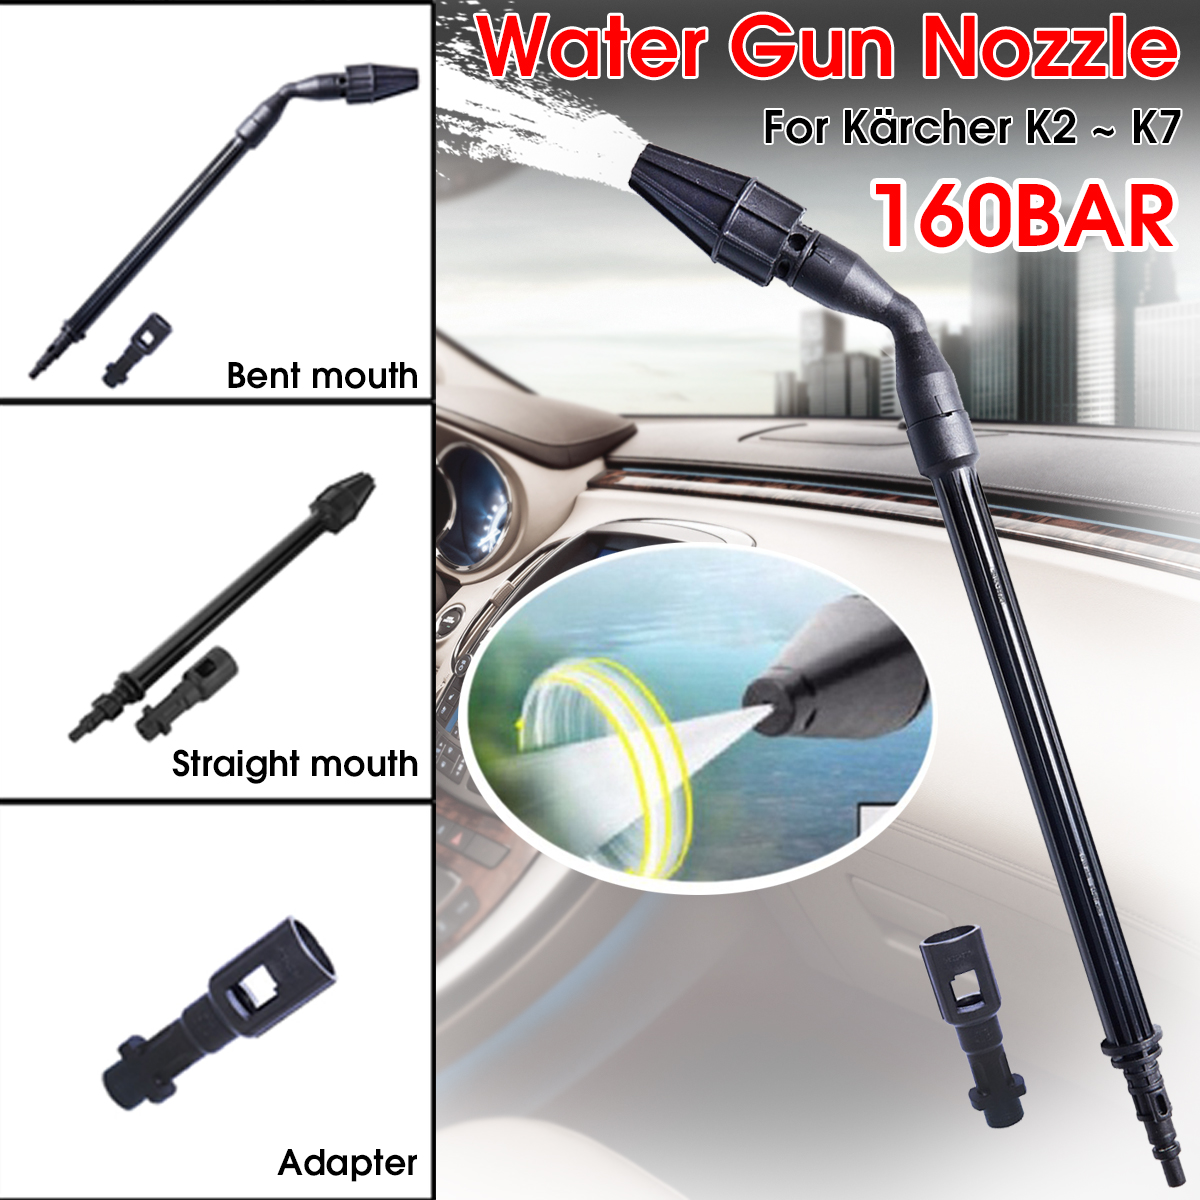 160-Bar-High-Pressure-Washer-Nozzle-432cm-StraightBent-Mouth-Adapter-1662973-2